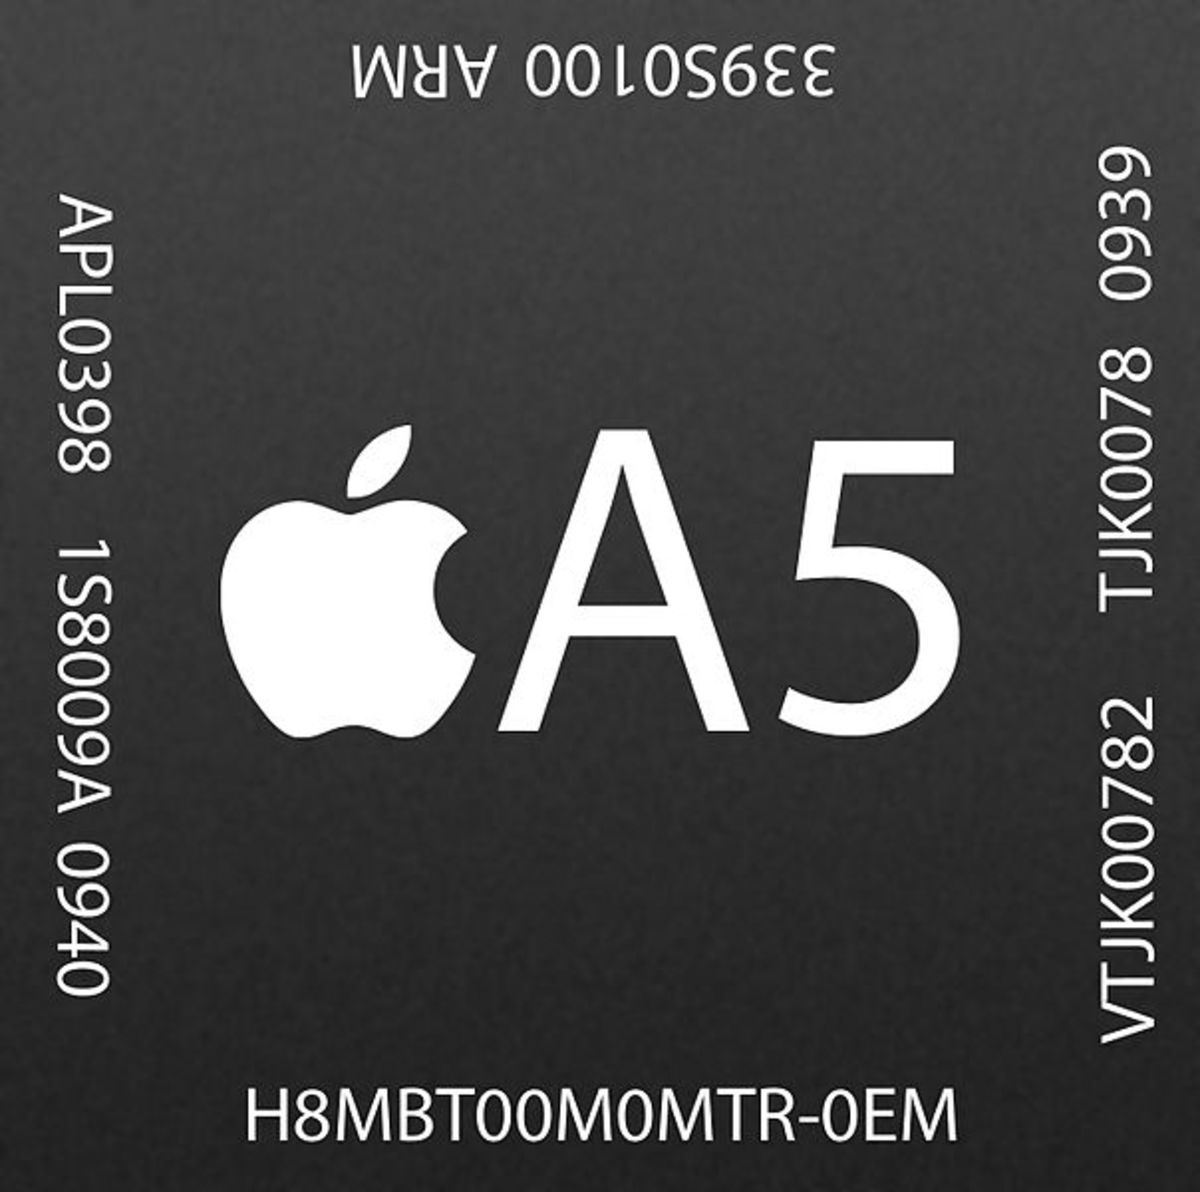 The Dual core processor featured in iPhone 4S. The processor runs 512 MB of Random Access Memory